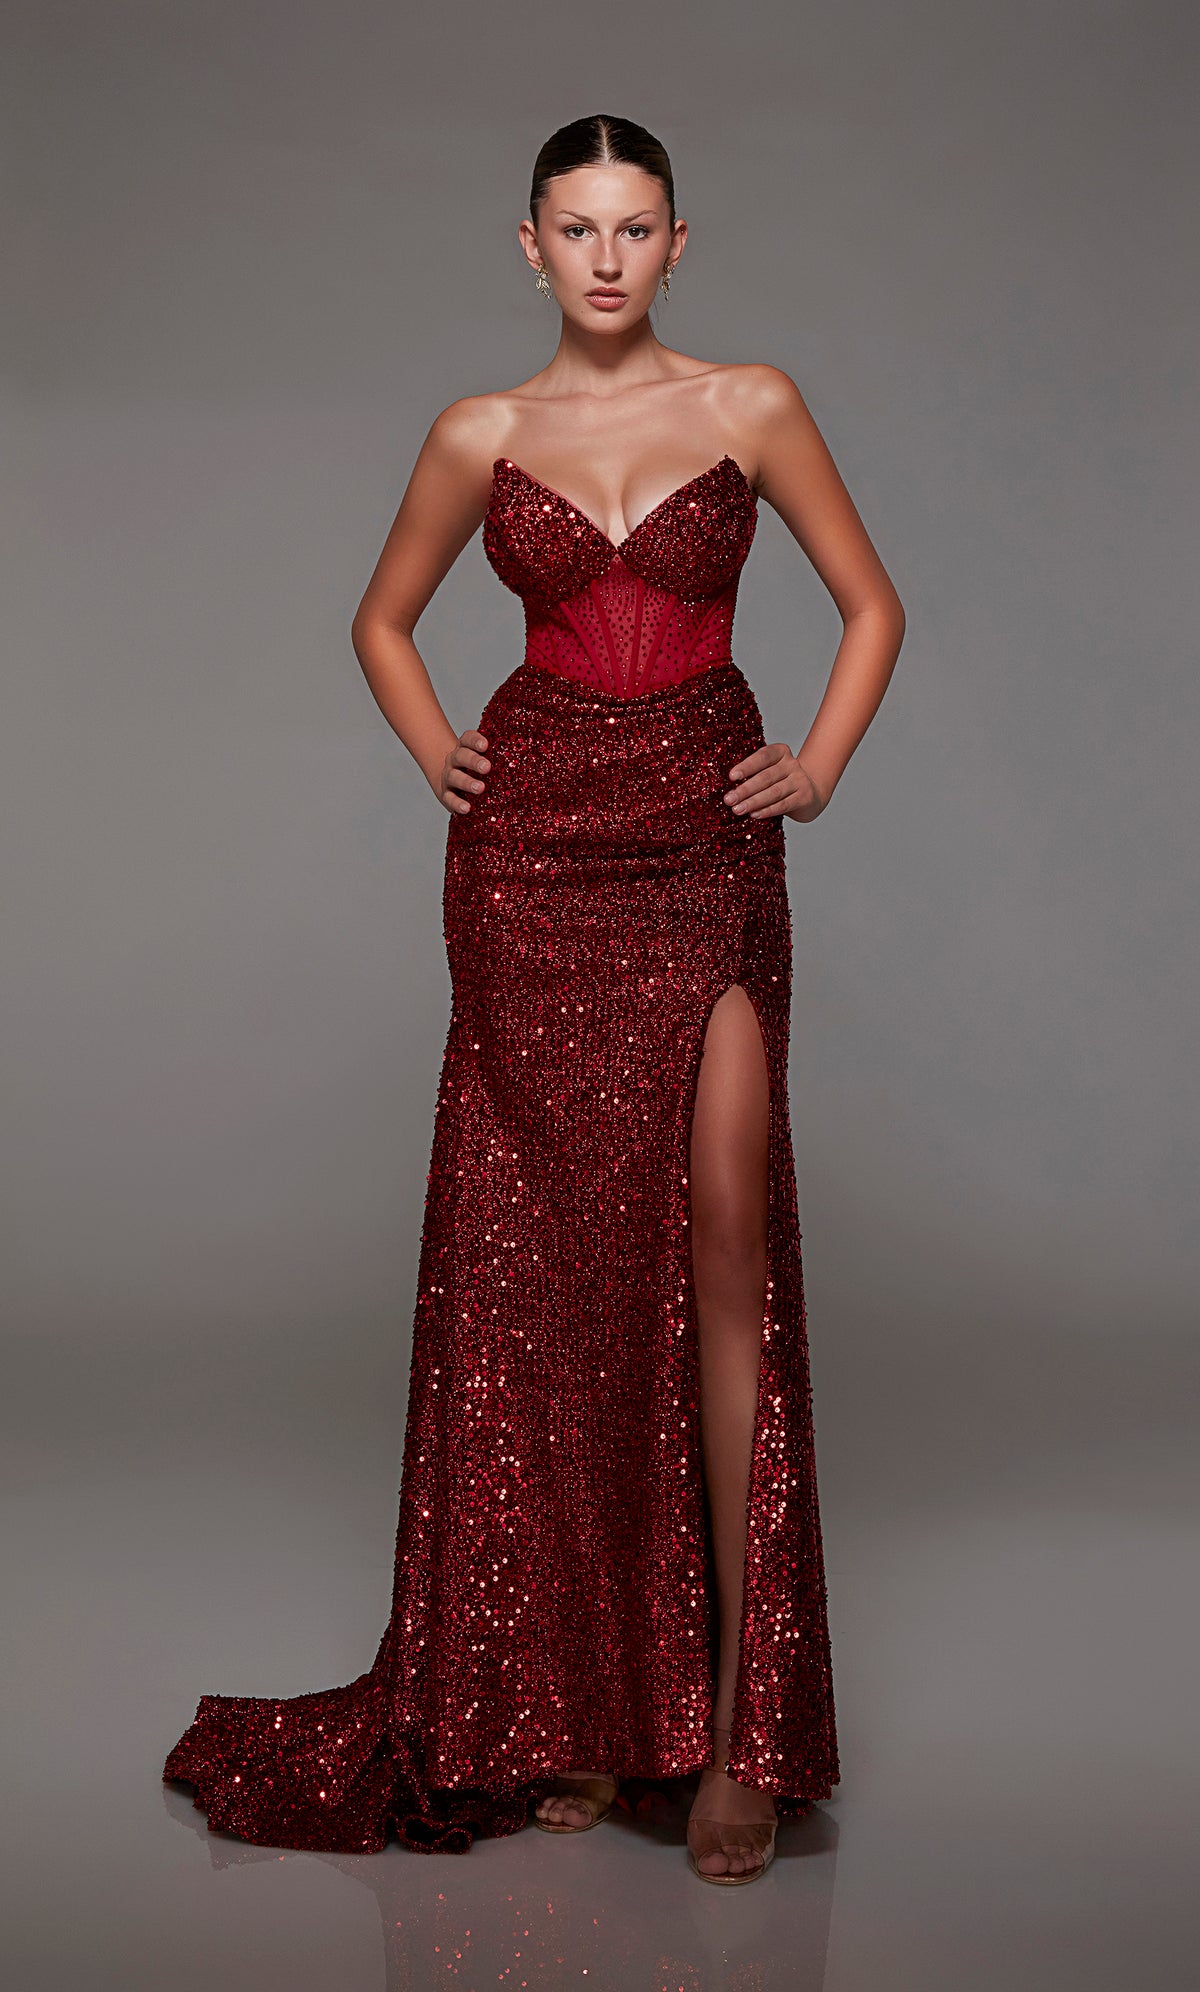 Captivating wine strapless prom dress with intricate sequin detailing, corset bodice, alluring slit, and an graceful train for an red-carpet-worthy look.